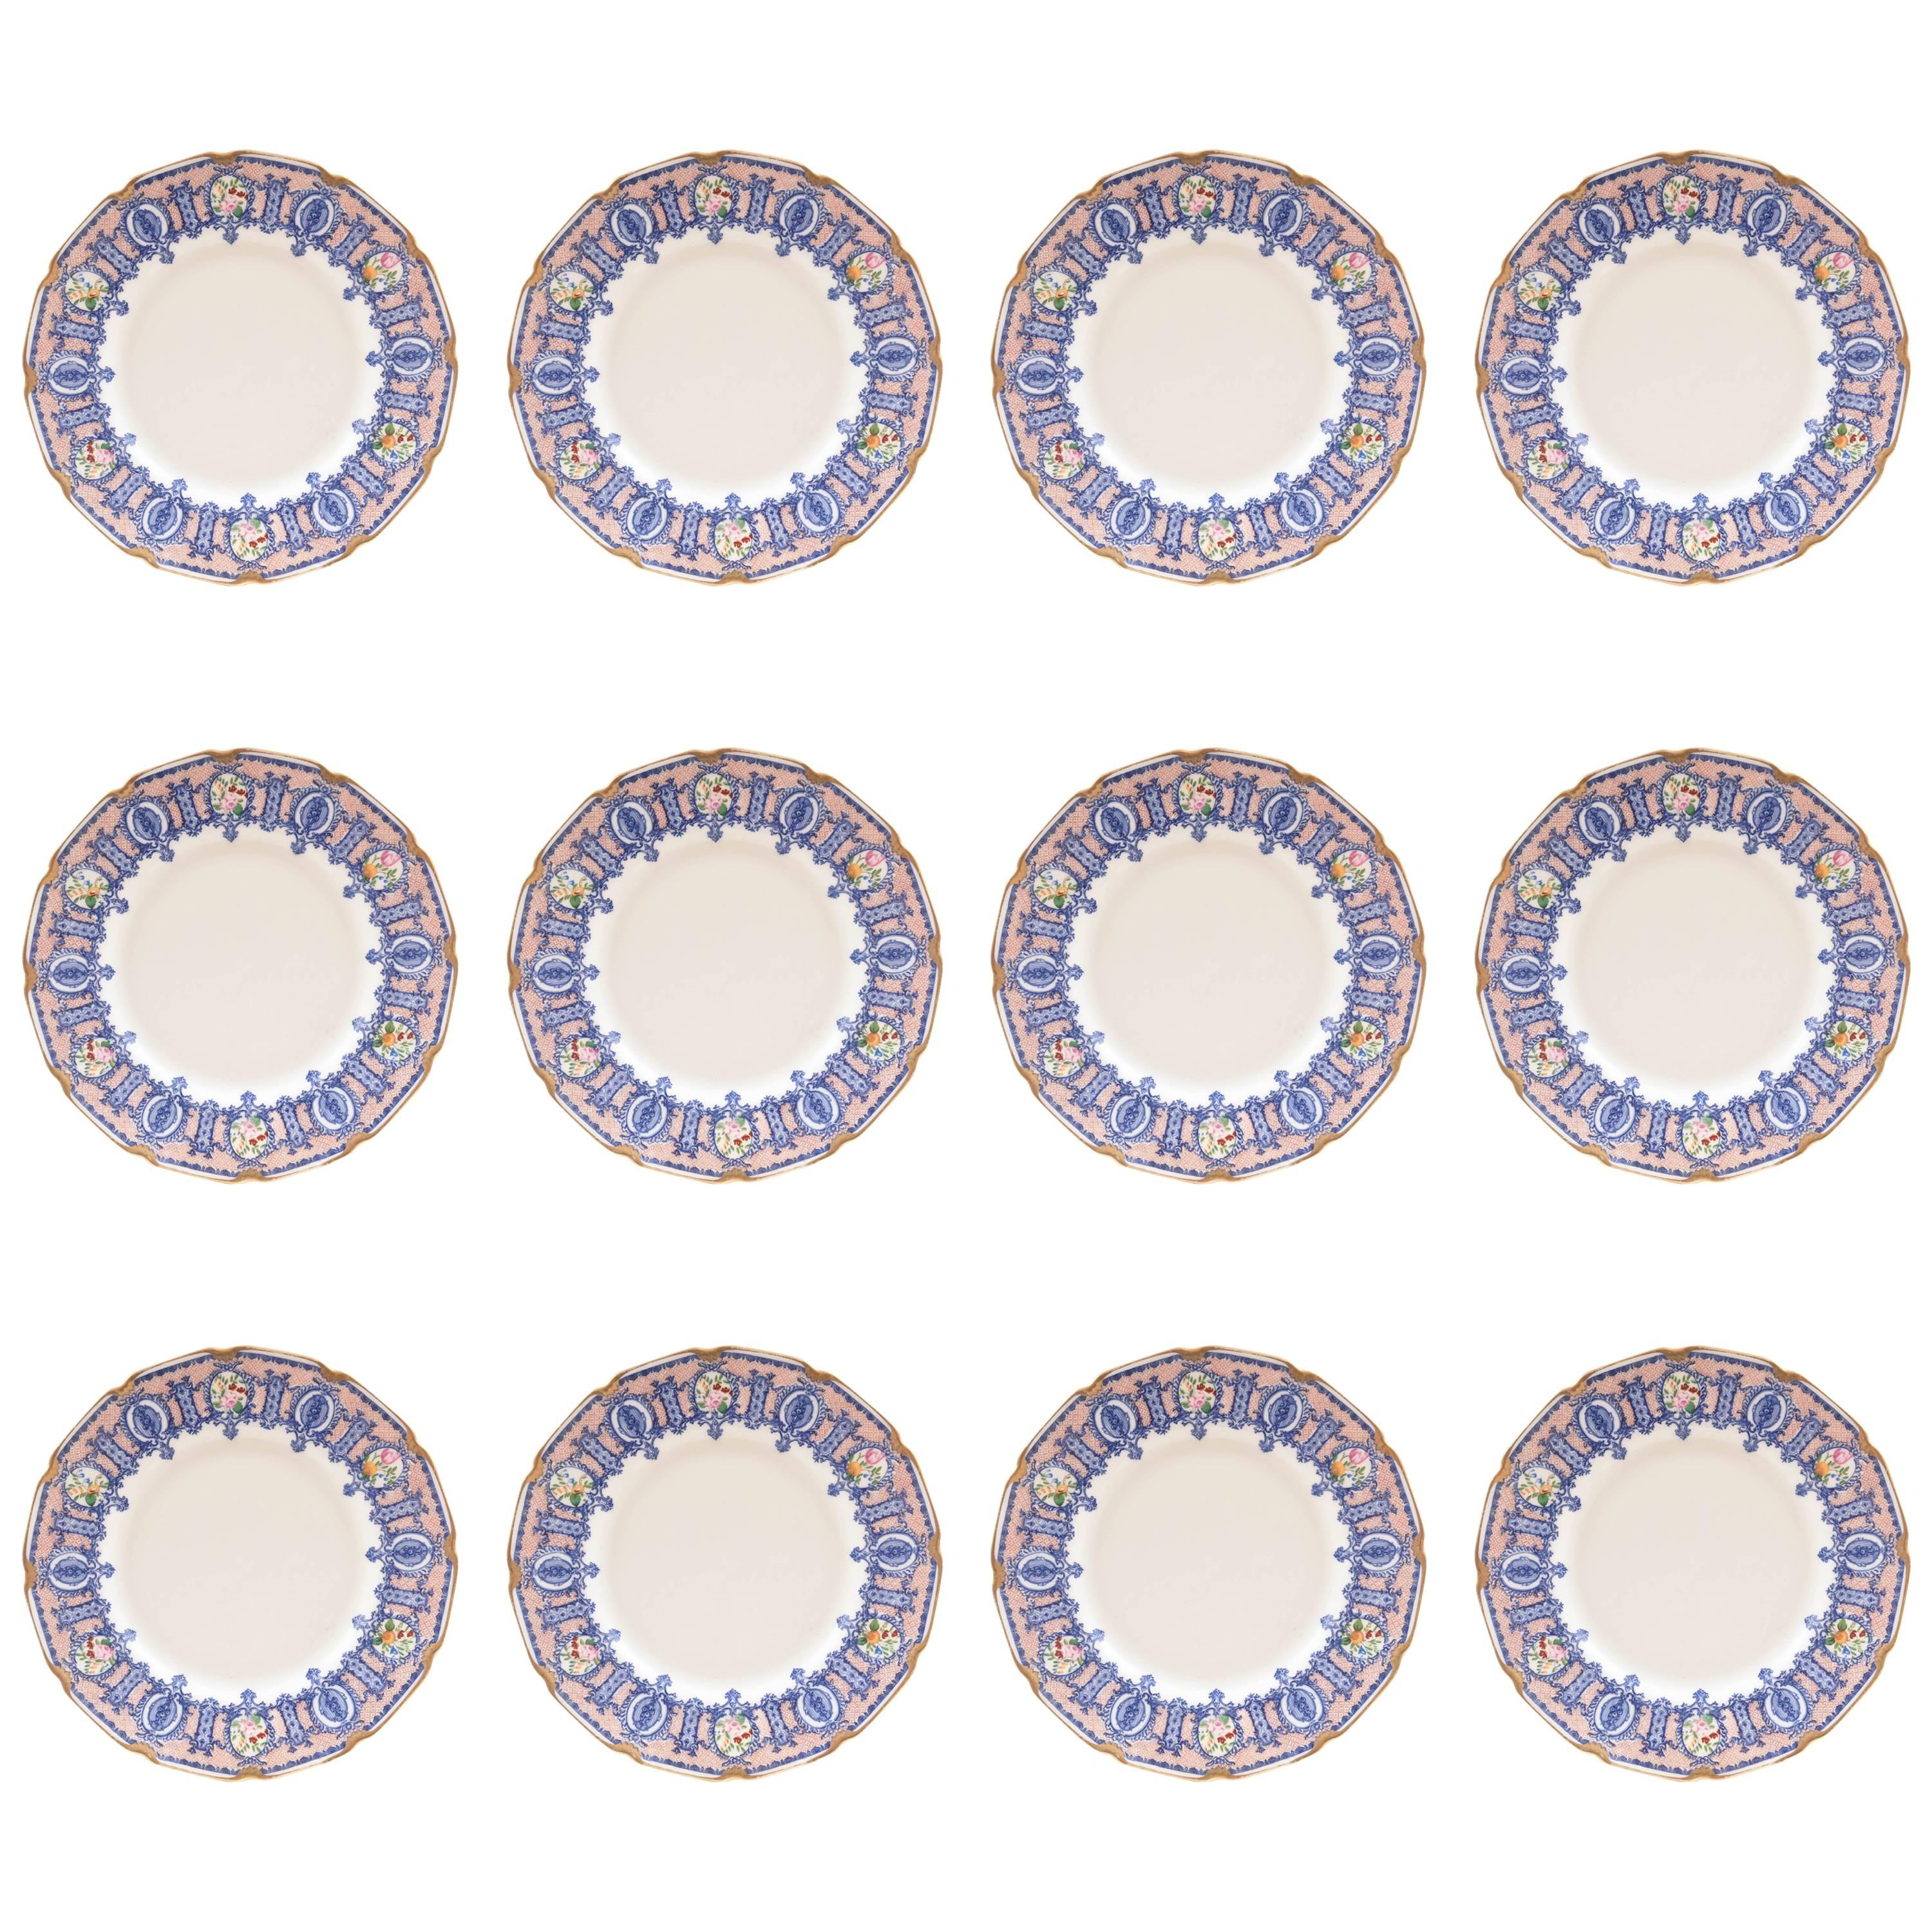 12 Antique Dessert Plates, Blue with Roses, Custom Ordered Marshall Fields